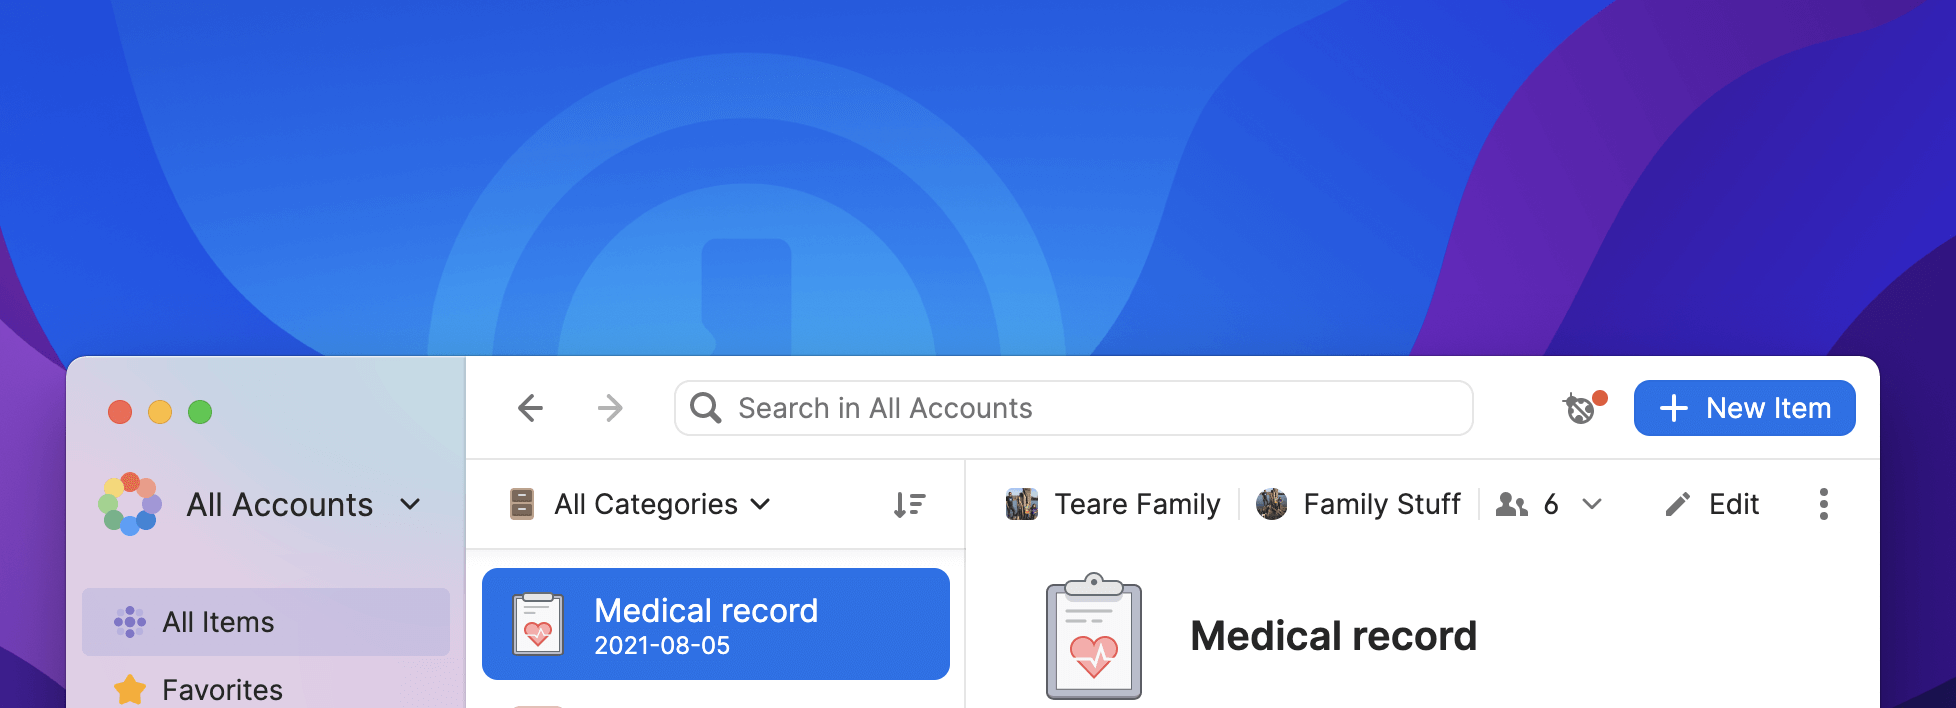 1Password app has back and forward